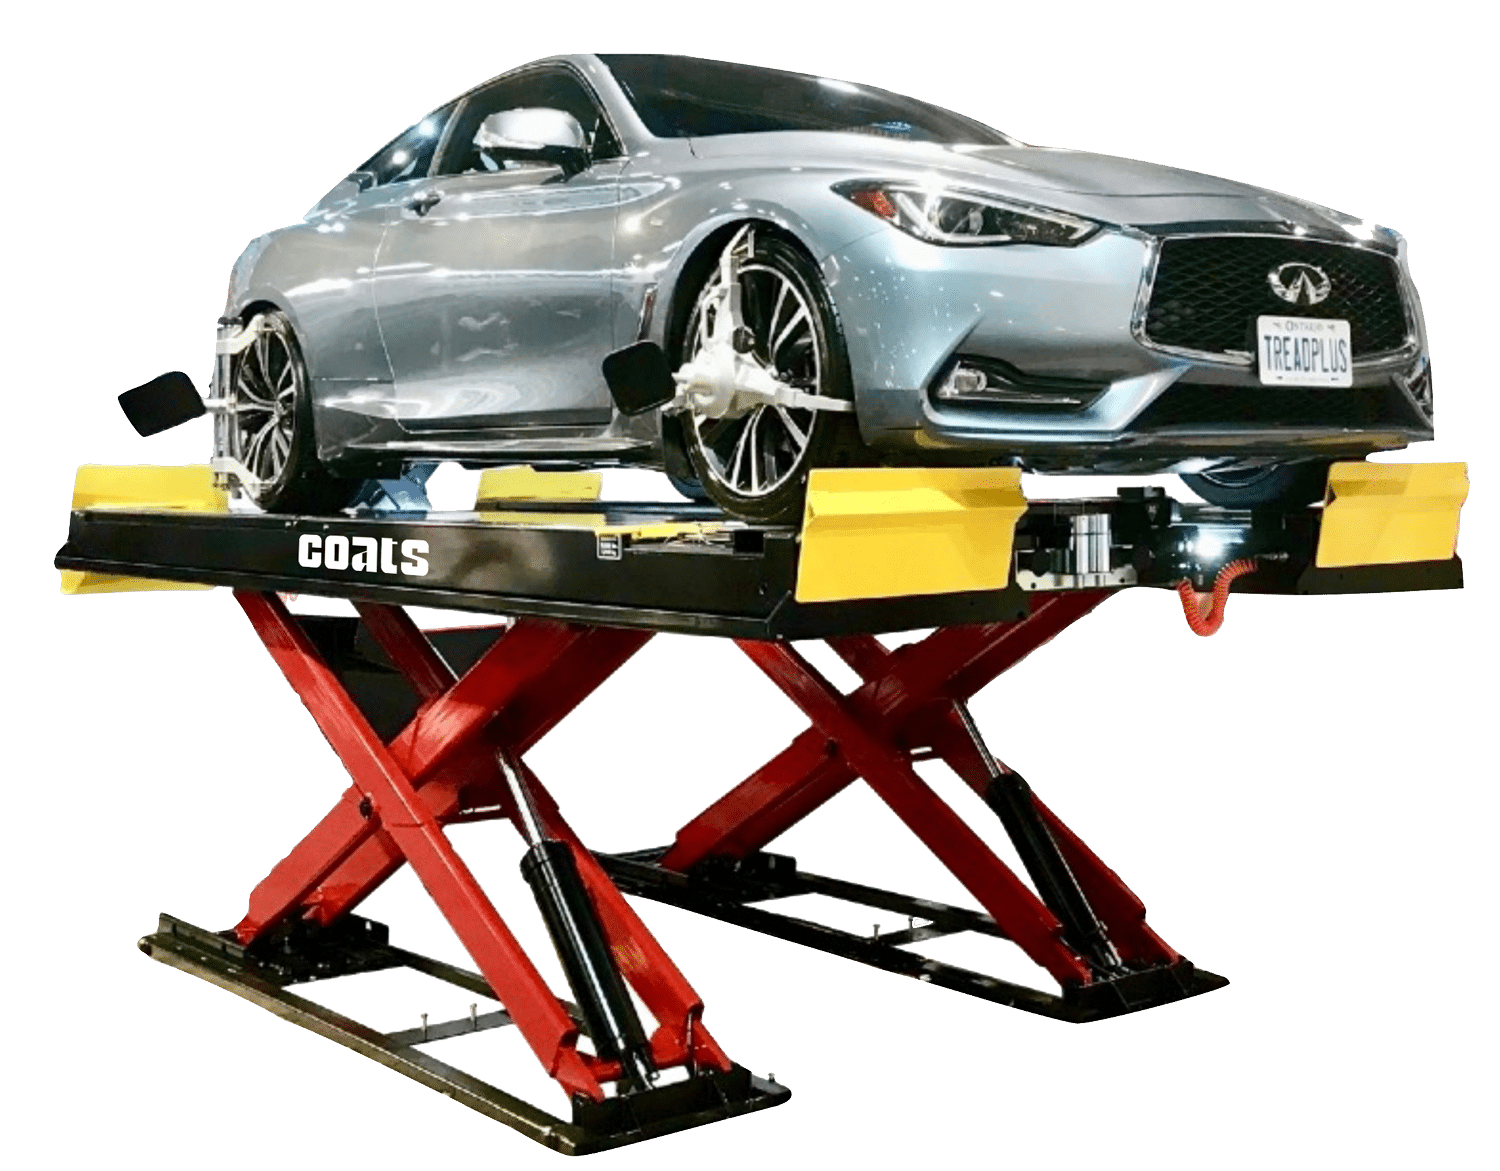 A Coats 12K alignment scissor lift with yellow front plate stops has a silver sedan resting on top of the lift